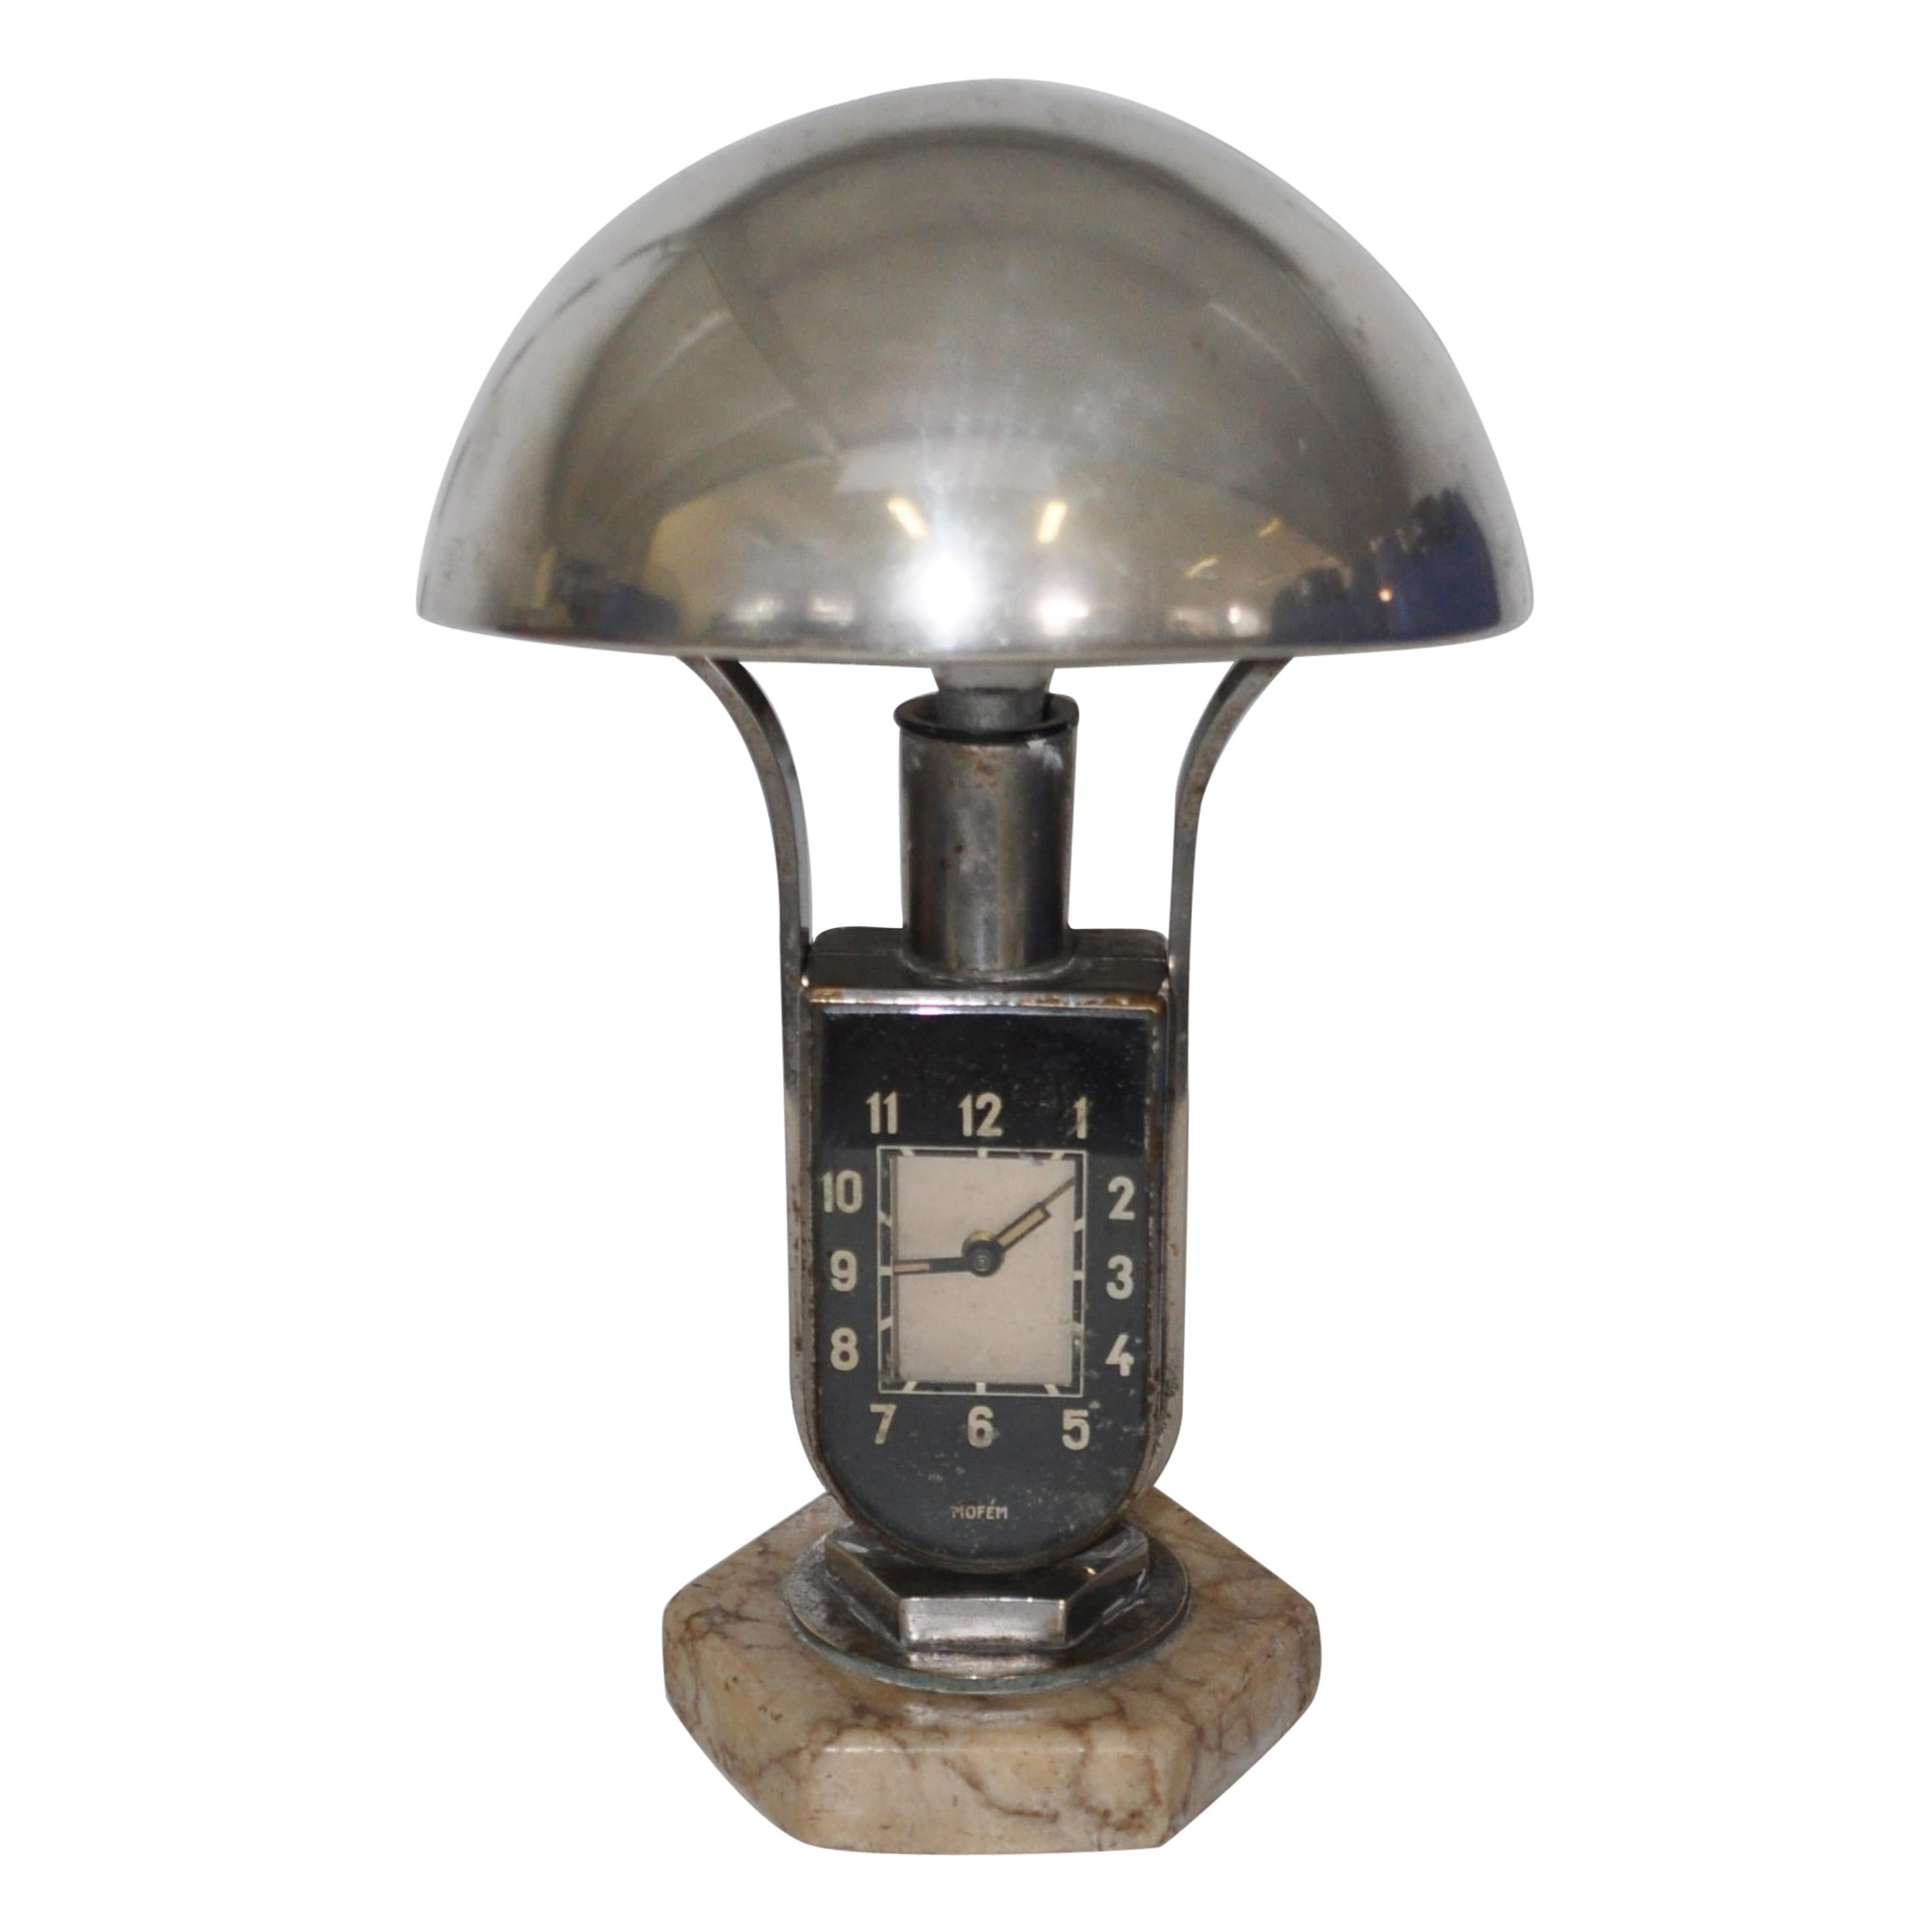 Mofem, Art Deco Lamp with Alarm Clock For Sale at 1stDibs